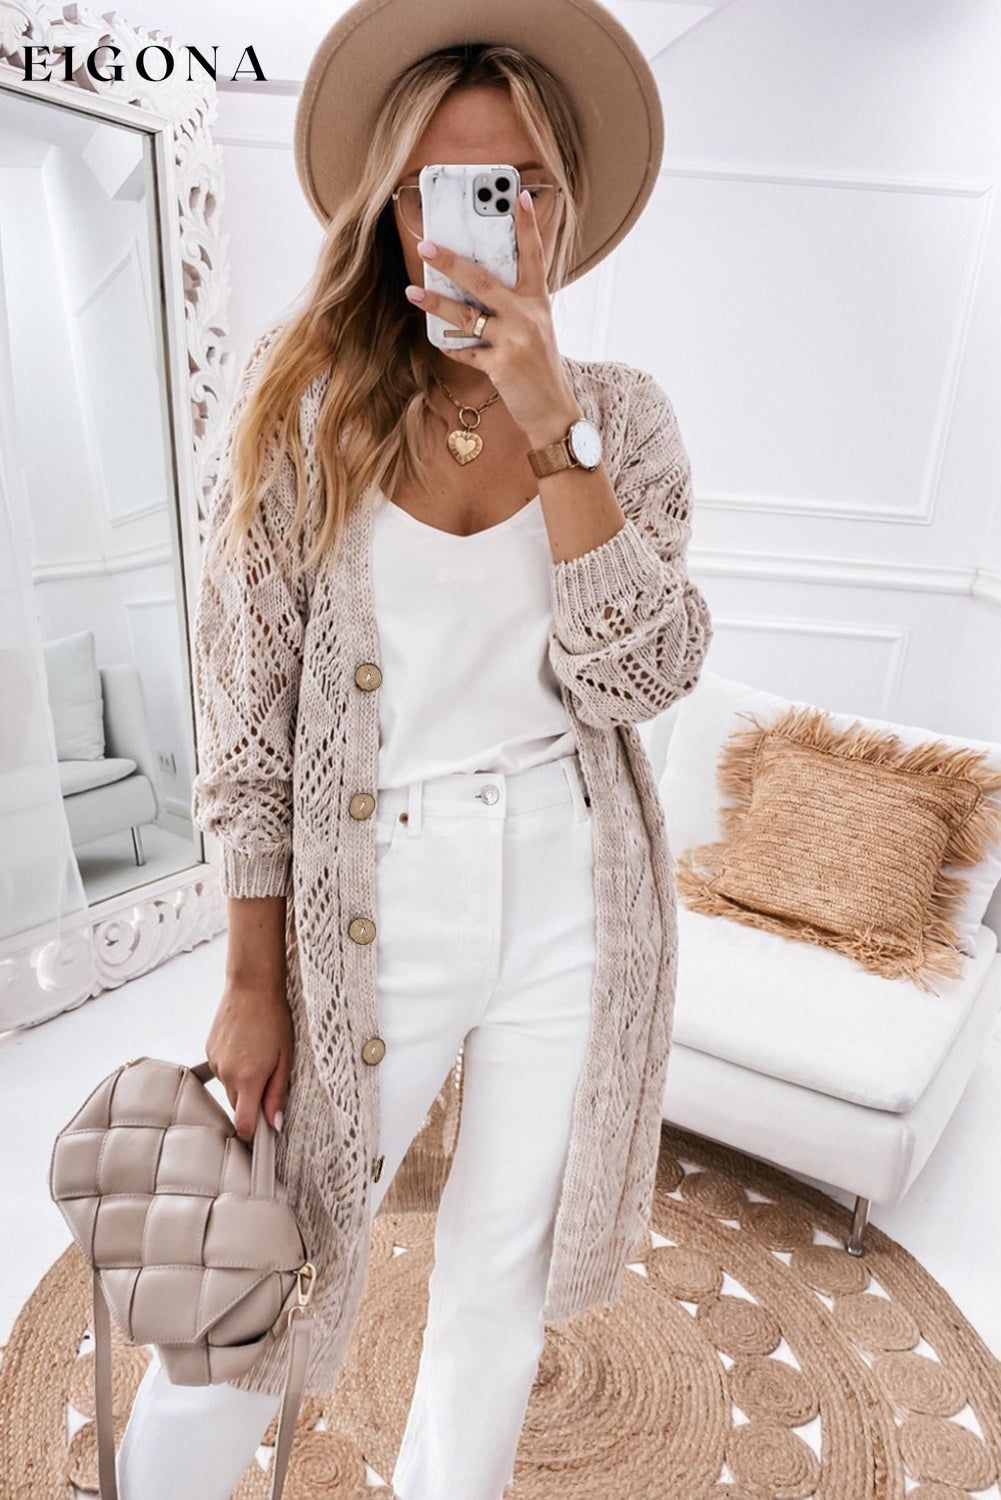 Khaki Hollow-out Openwork Knit Cardigan All In Stock Best Sellers Category duster cardigan clothes Craft Crochet cárdigan Occasion Daily Print Solid Color Season Fall & Autumn Style Elegant sweater sweaters